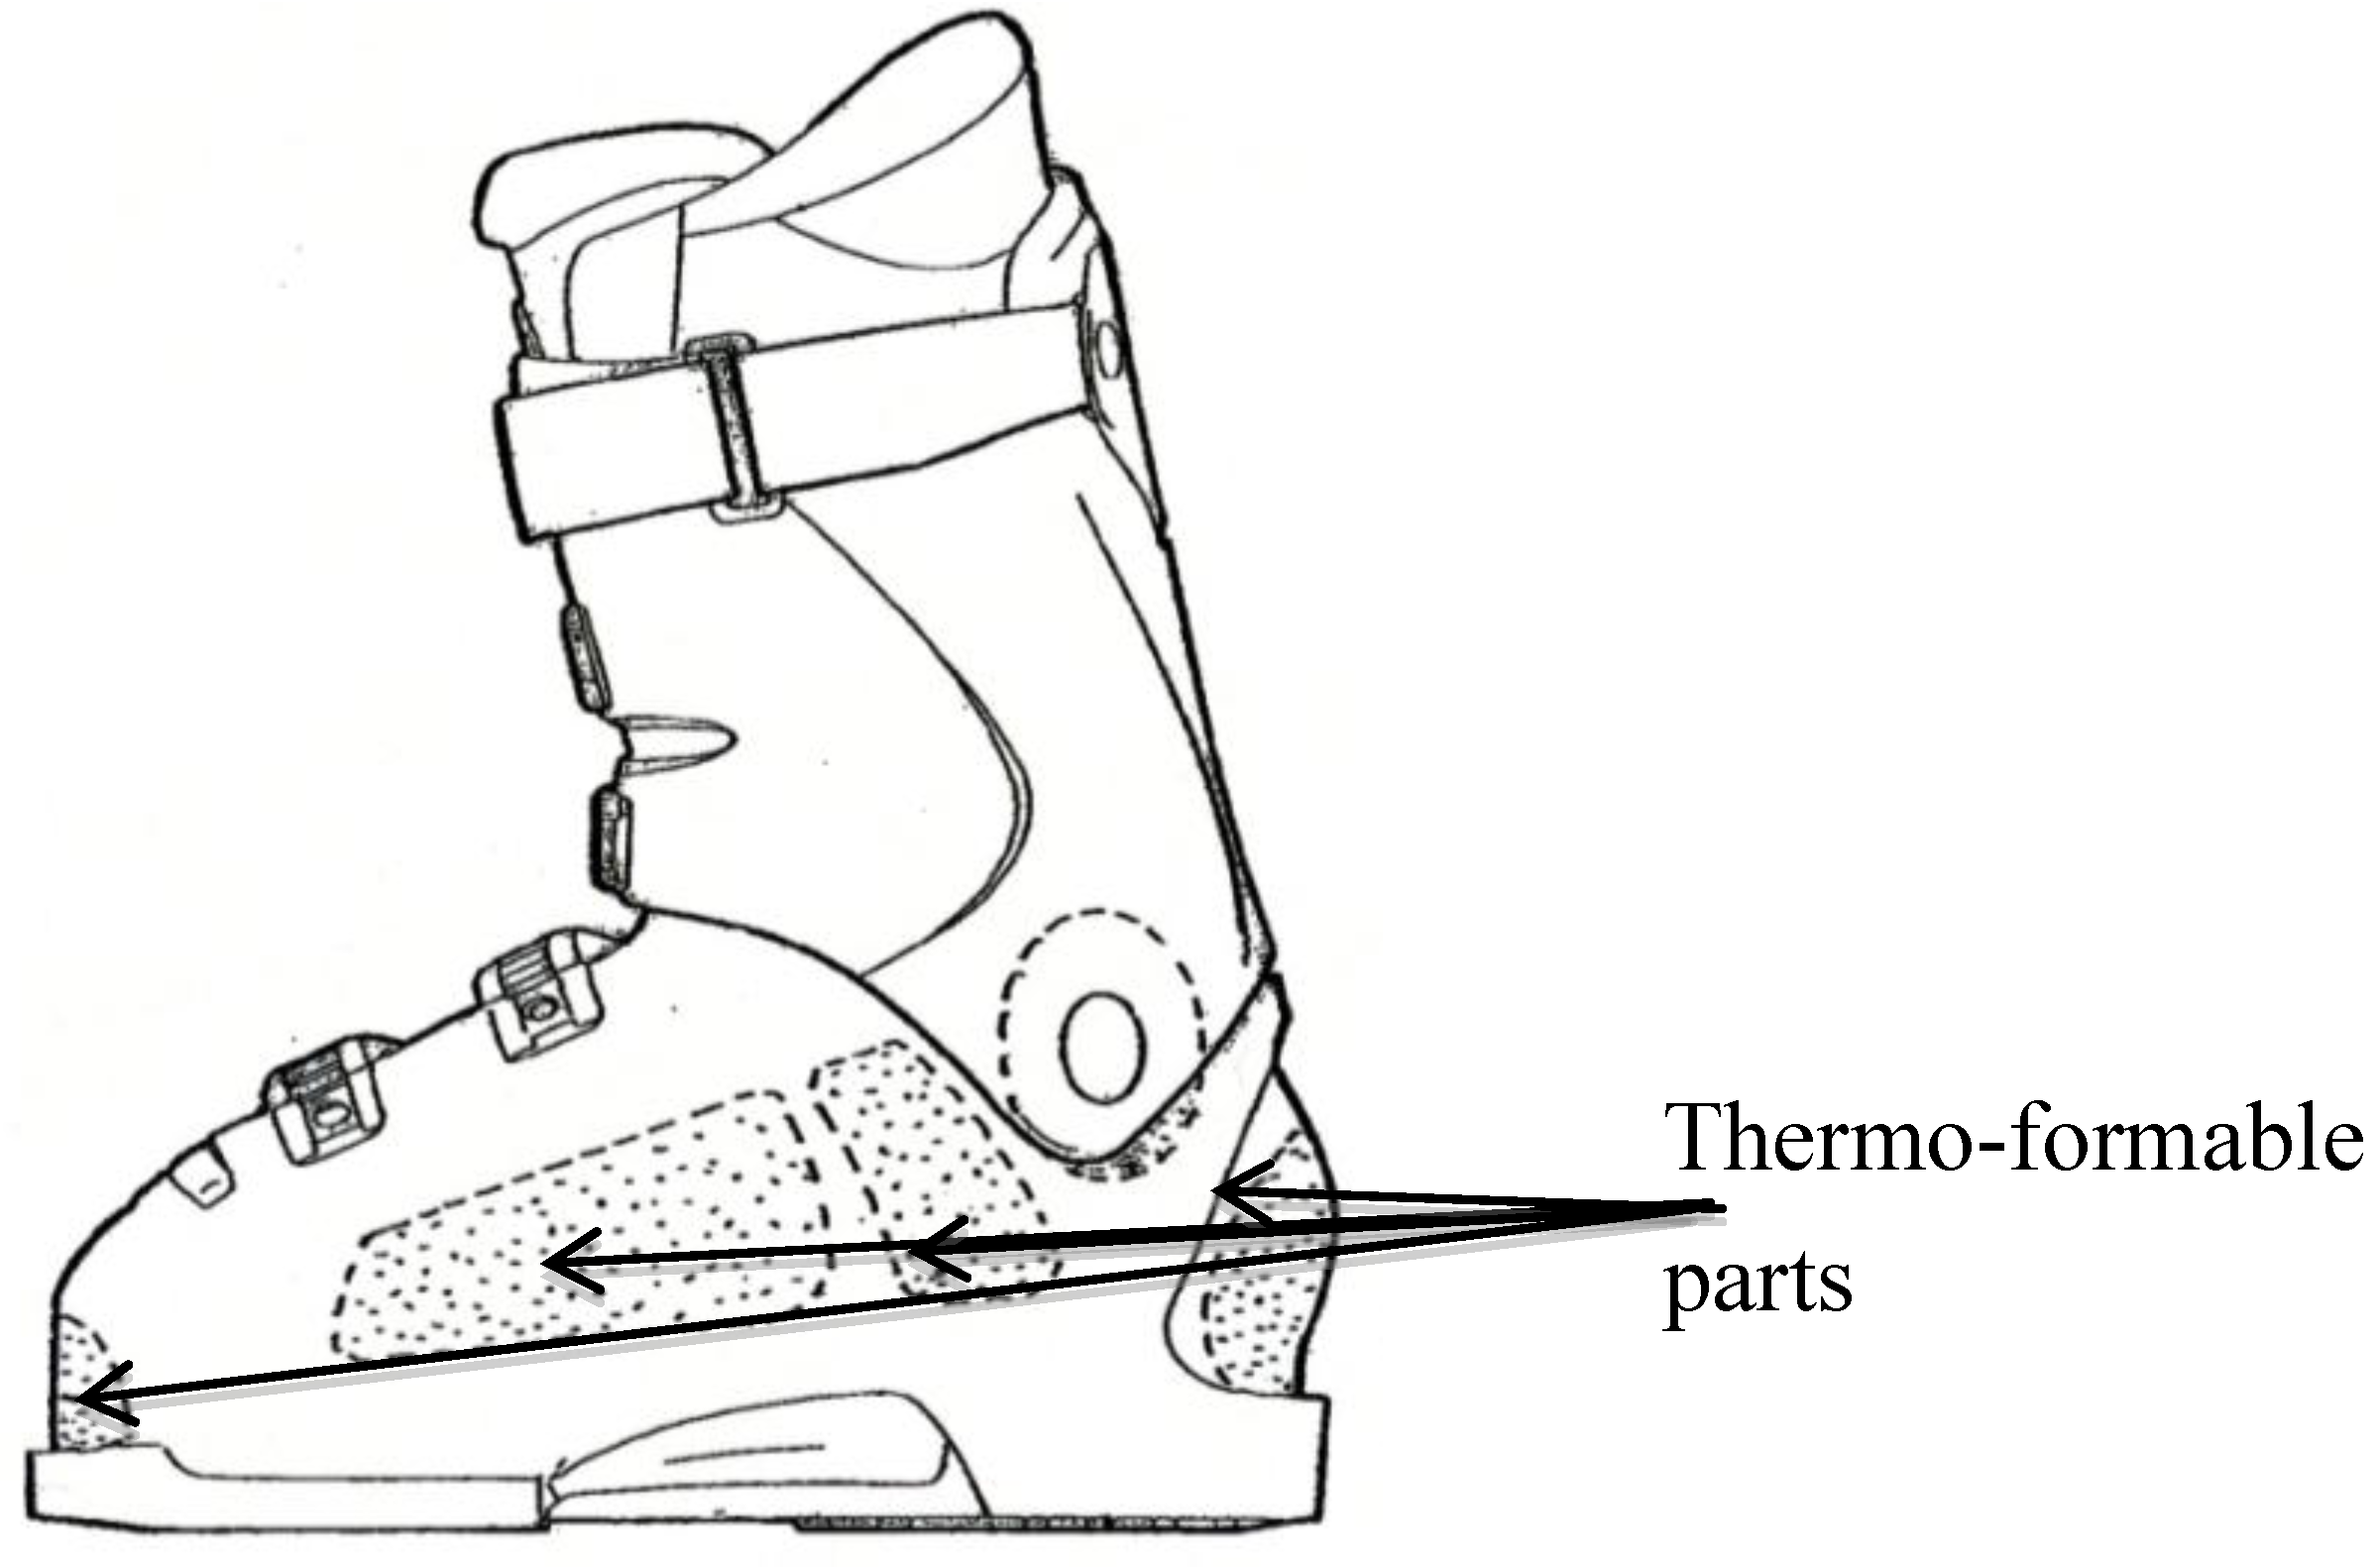 Sports | Free Full-Text | Materials, Designs and Standards Used in Ski-Boots  for Alpine Skiing